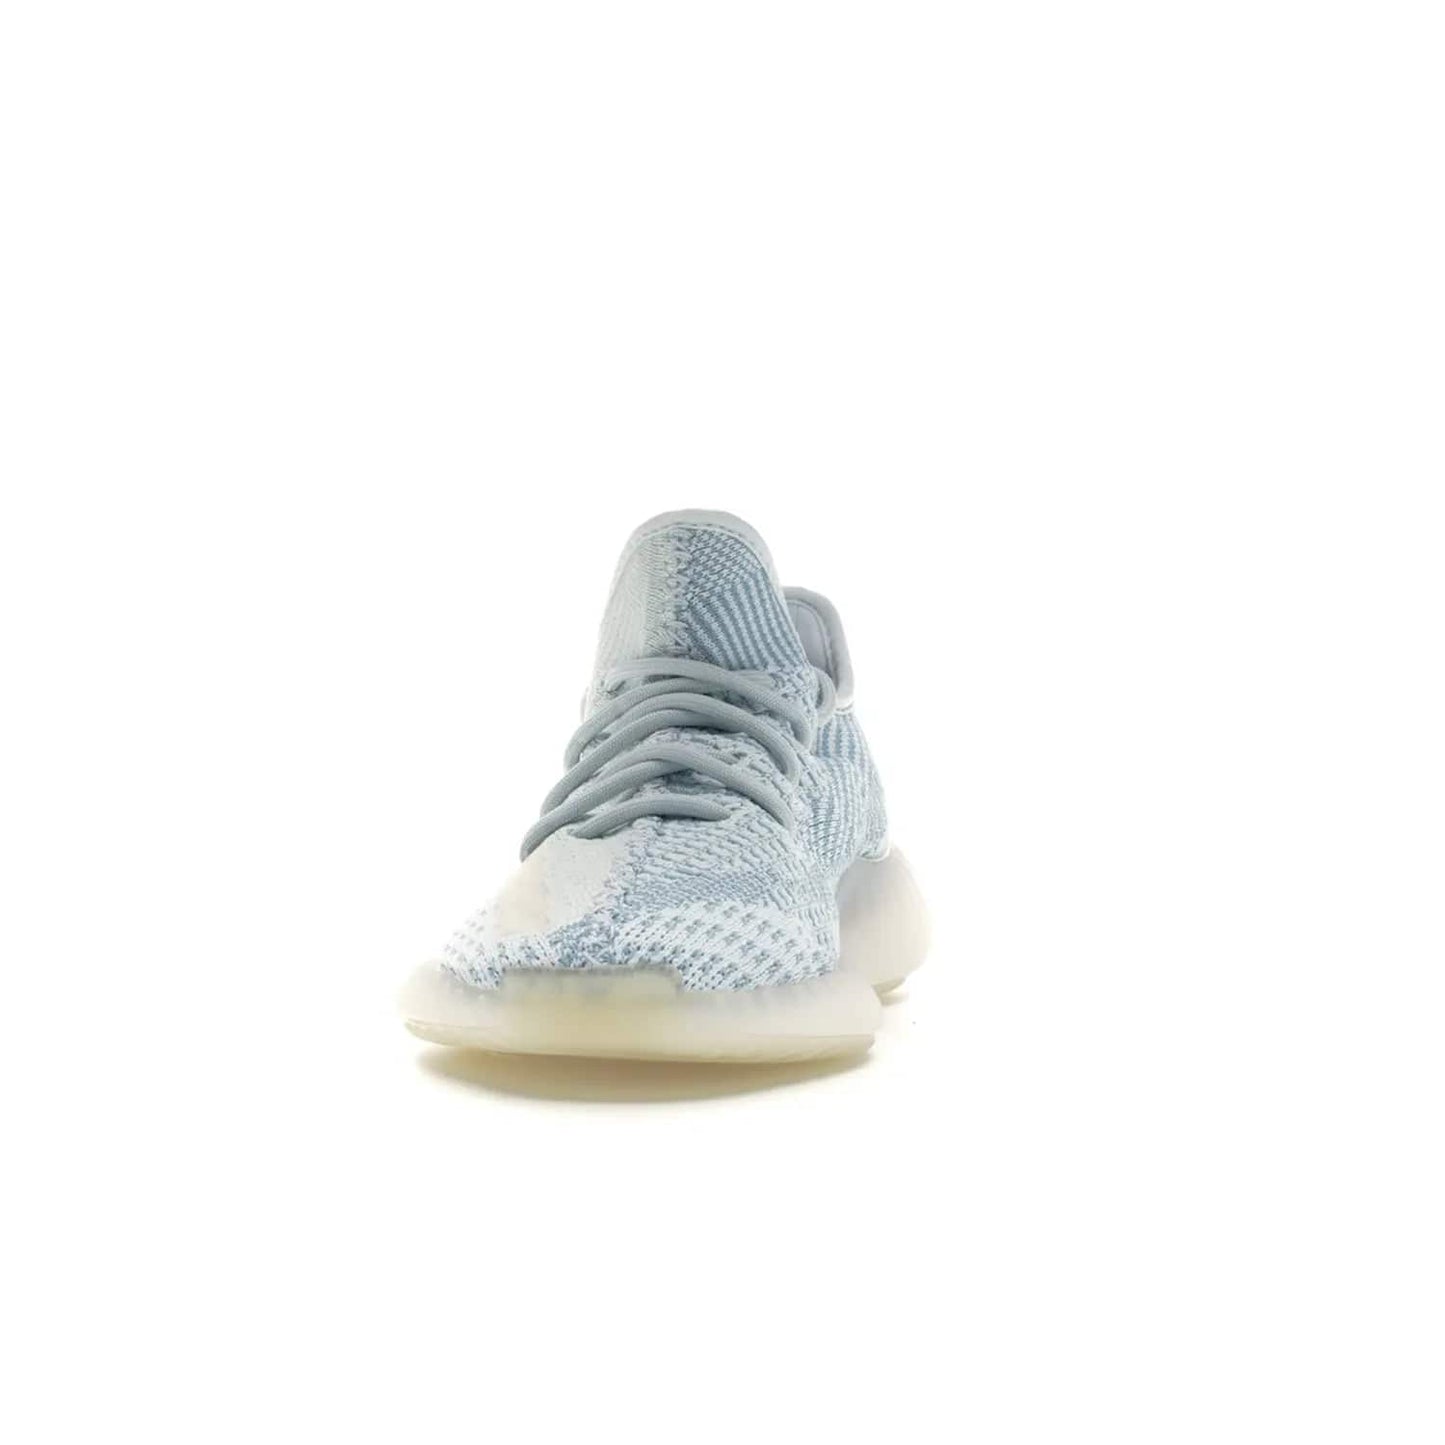 adidas Yeezy Boost 350 V2 Cloud White (Non-Reflective) - Image 11 - Only at www.BallersClubKickz.com - Adidas Yeezy Boost 350 V2 Cloud White (Non-Reflective) features Primeknit fabric and a unique, eye-catching design of cream, bluish-white, and transparent strip. Step out in timeless style with this eye-catching sneaker.